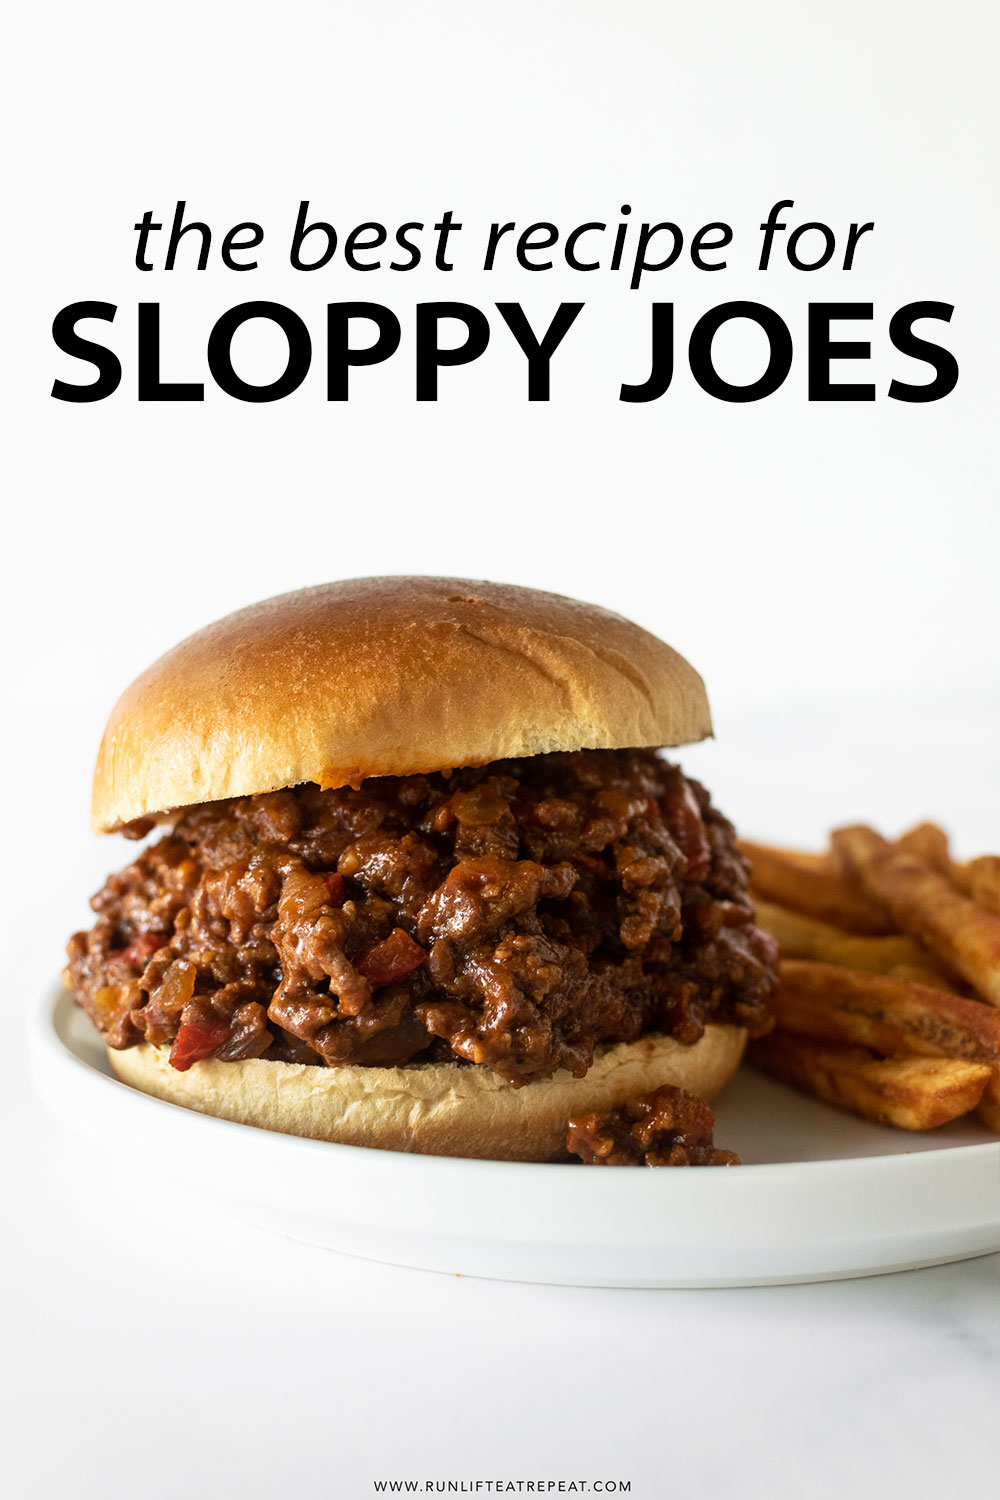 This is hands down the best sloppy joes recipe. Not only does it have BIG flavor thanks to the homemade sauce, it's a minimal effort recipe – made in one pan and done in 35 minutes!